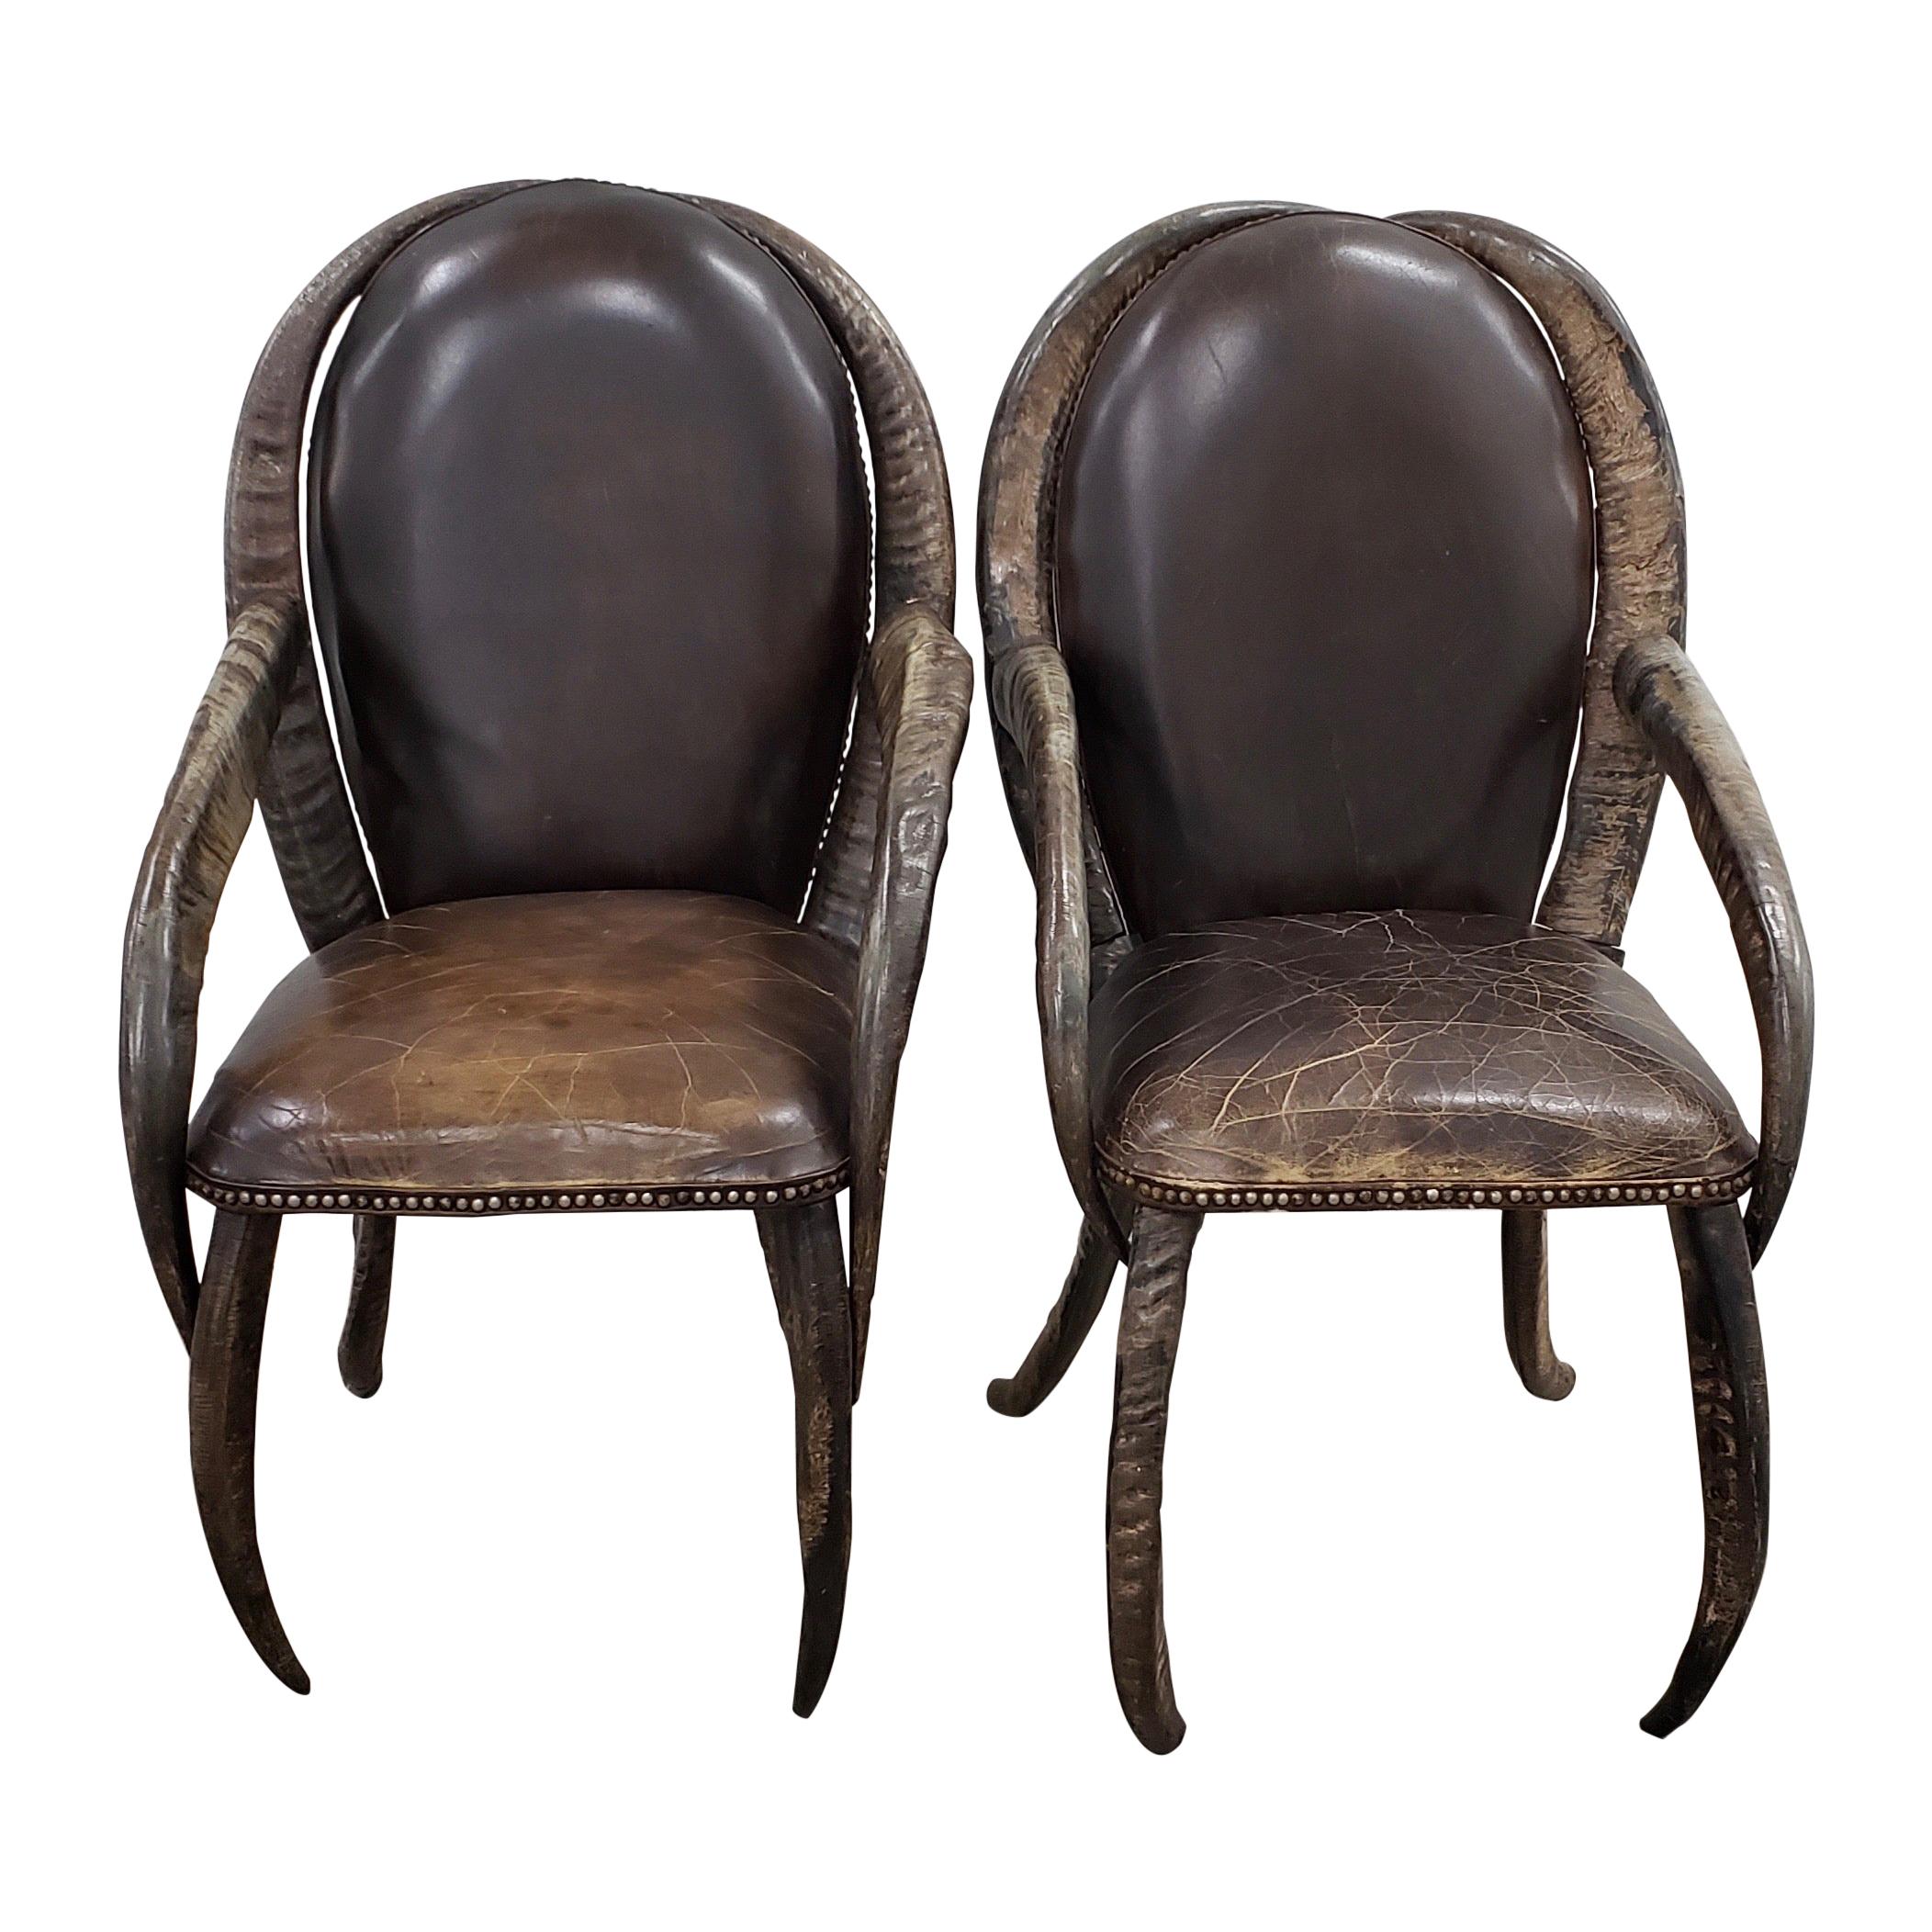 Pair of Mid-20th Century Water Buffalo Horn and Leather Armchairs